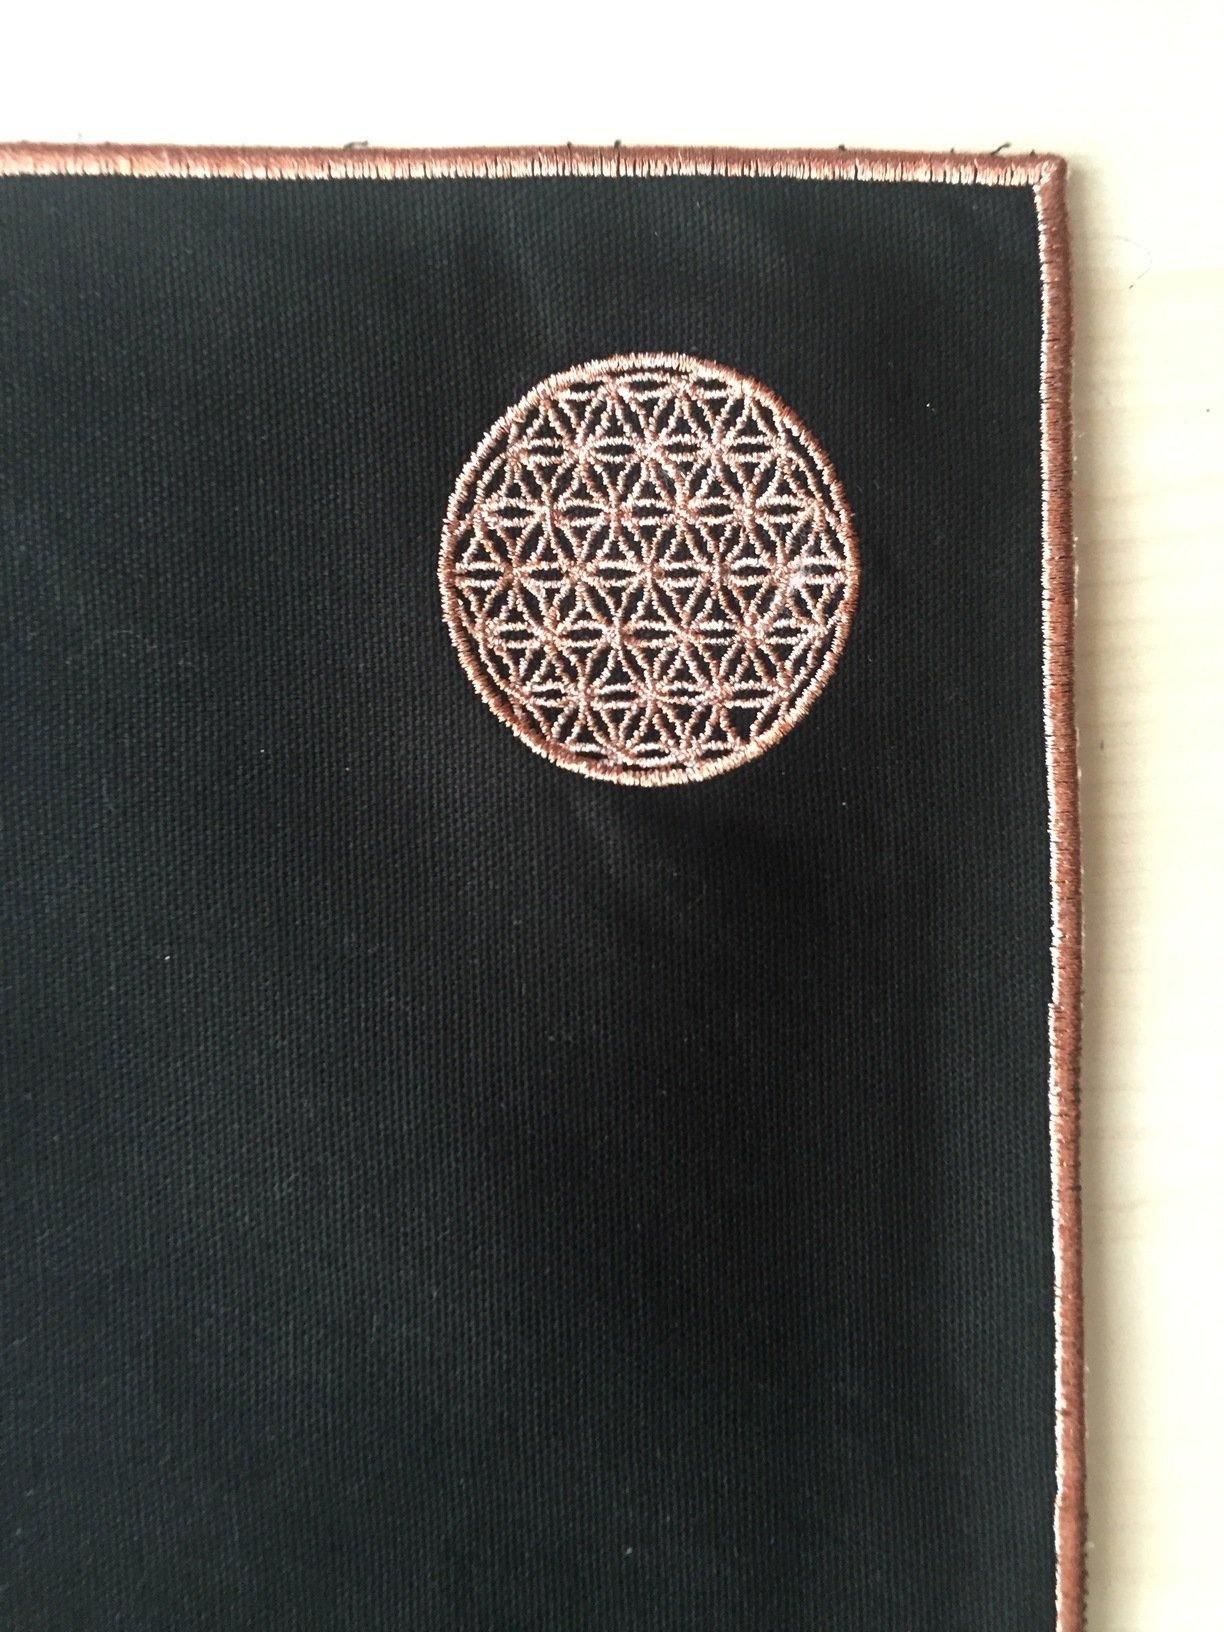 Embroidered Table Mat with Flower of Life - Copper - bohemtolia